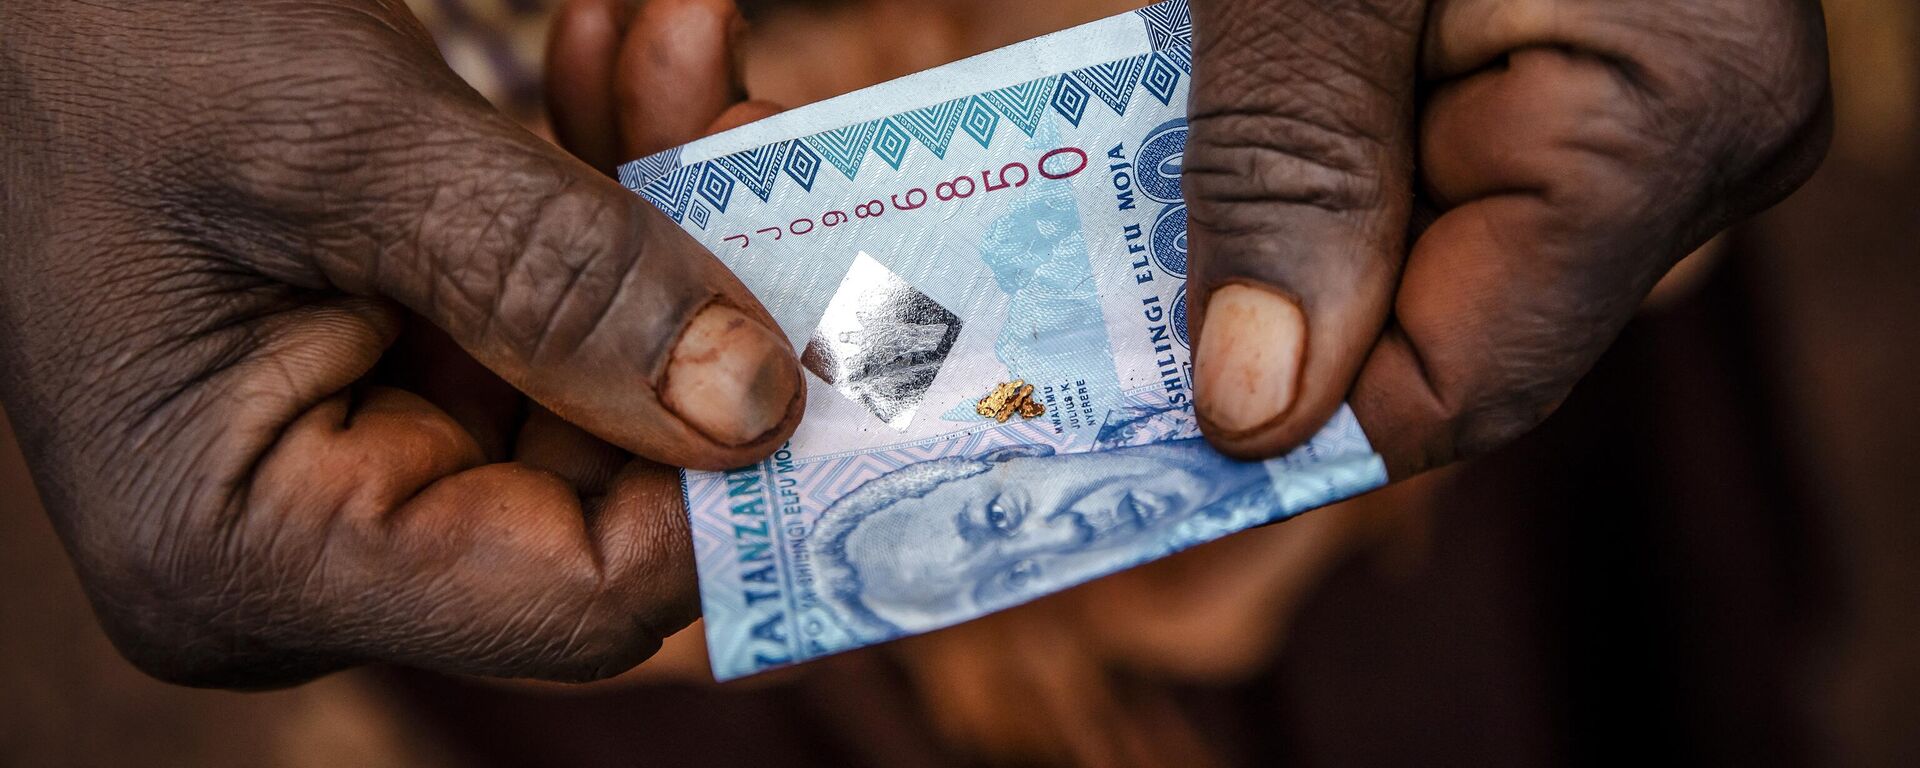 Tanzanian miner Lolesia Limbe folds in a Tanzanian note grains of gold obtained after panning near an open-pit gold mine in Nyarugusu, Geita Region, Tanzania on May 27, 2022. - Sputnik Africa, 1920, 22.06.2023